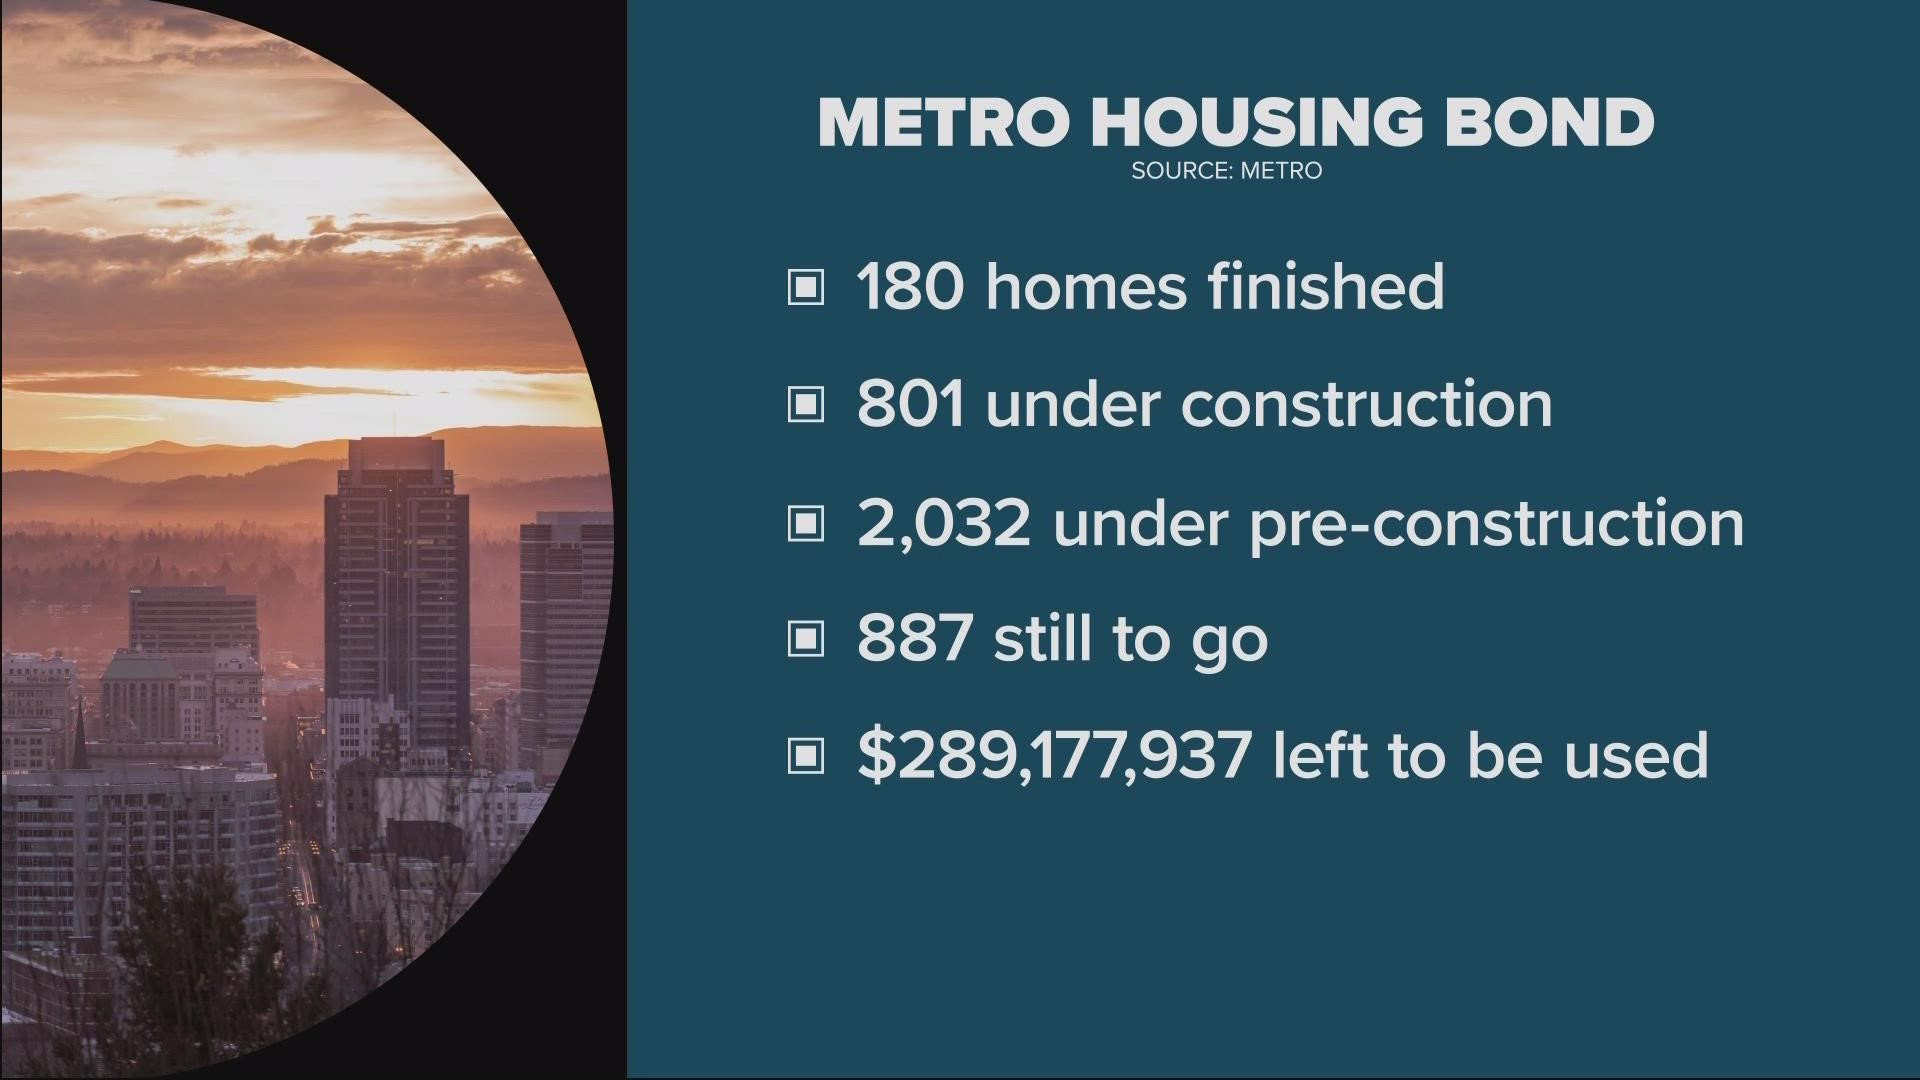 More than $16 million from the Metro Affordable Housing Bond passed in 2018 is helping fund the $60 million project.